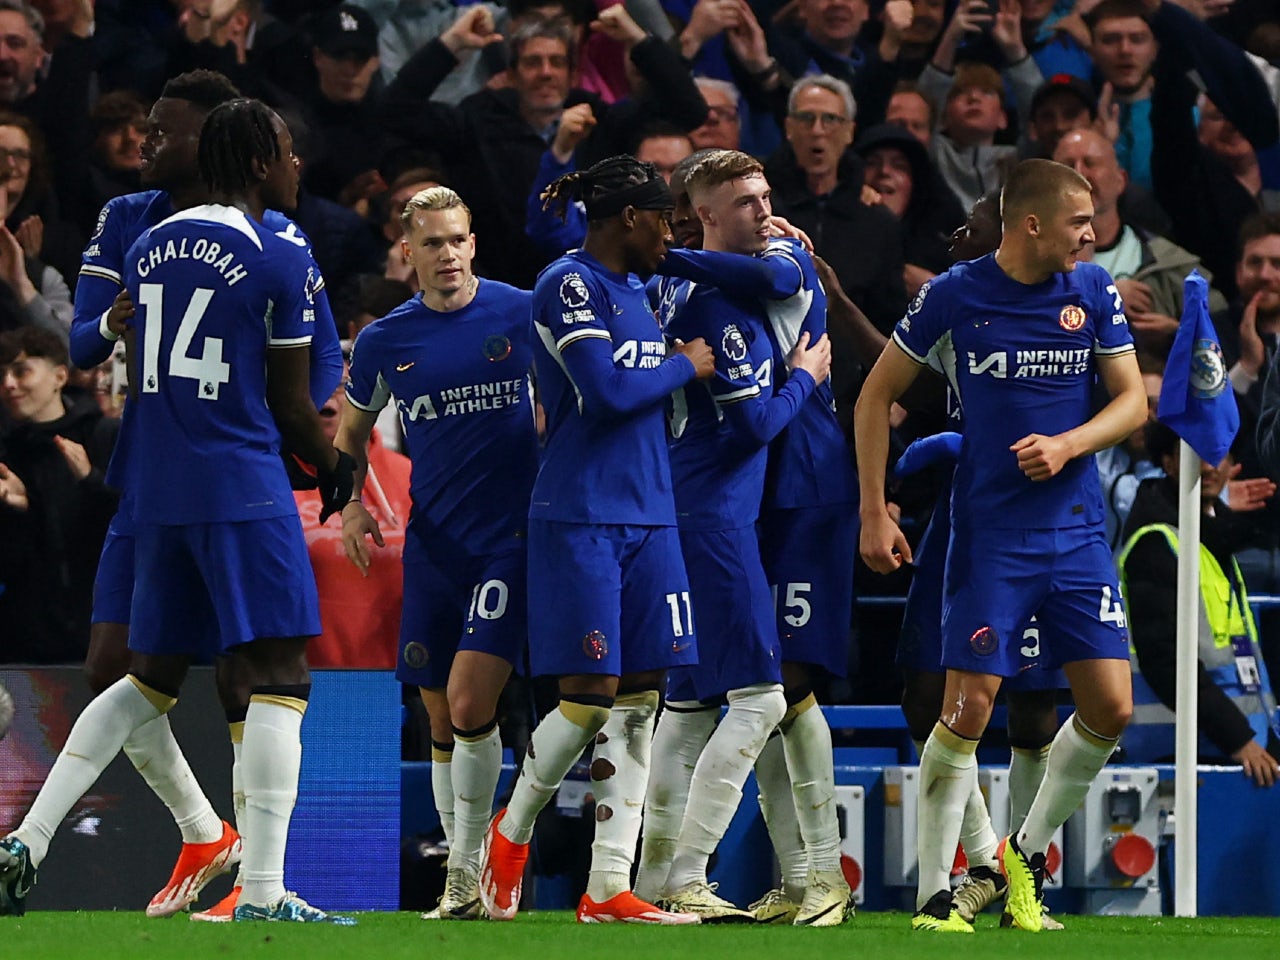 Why to expect a high-scoring Chelsea win against West Ham United